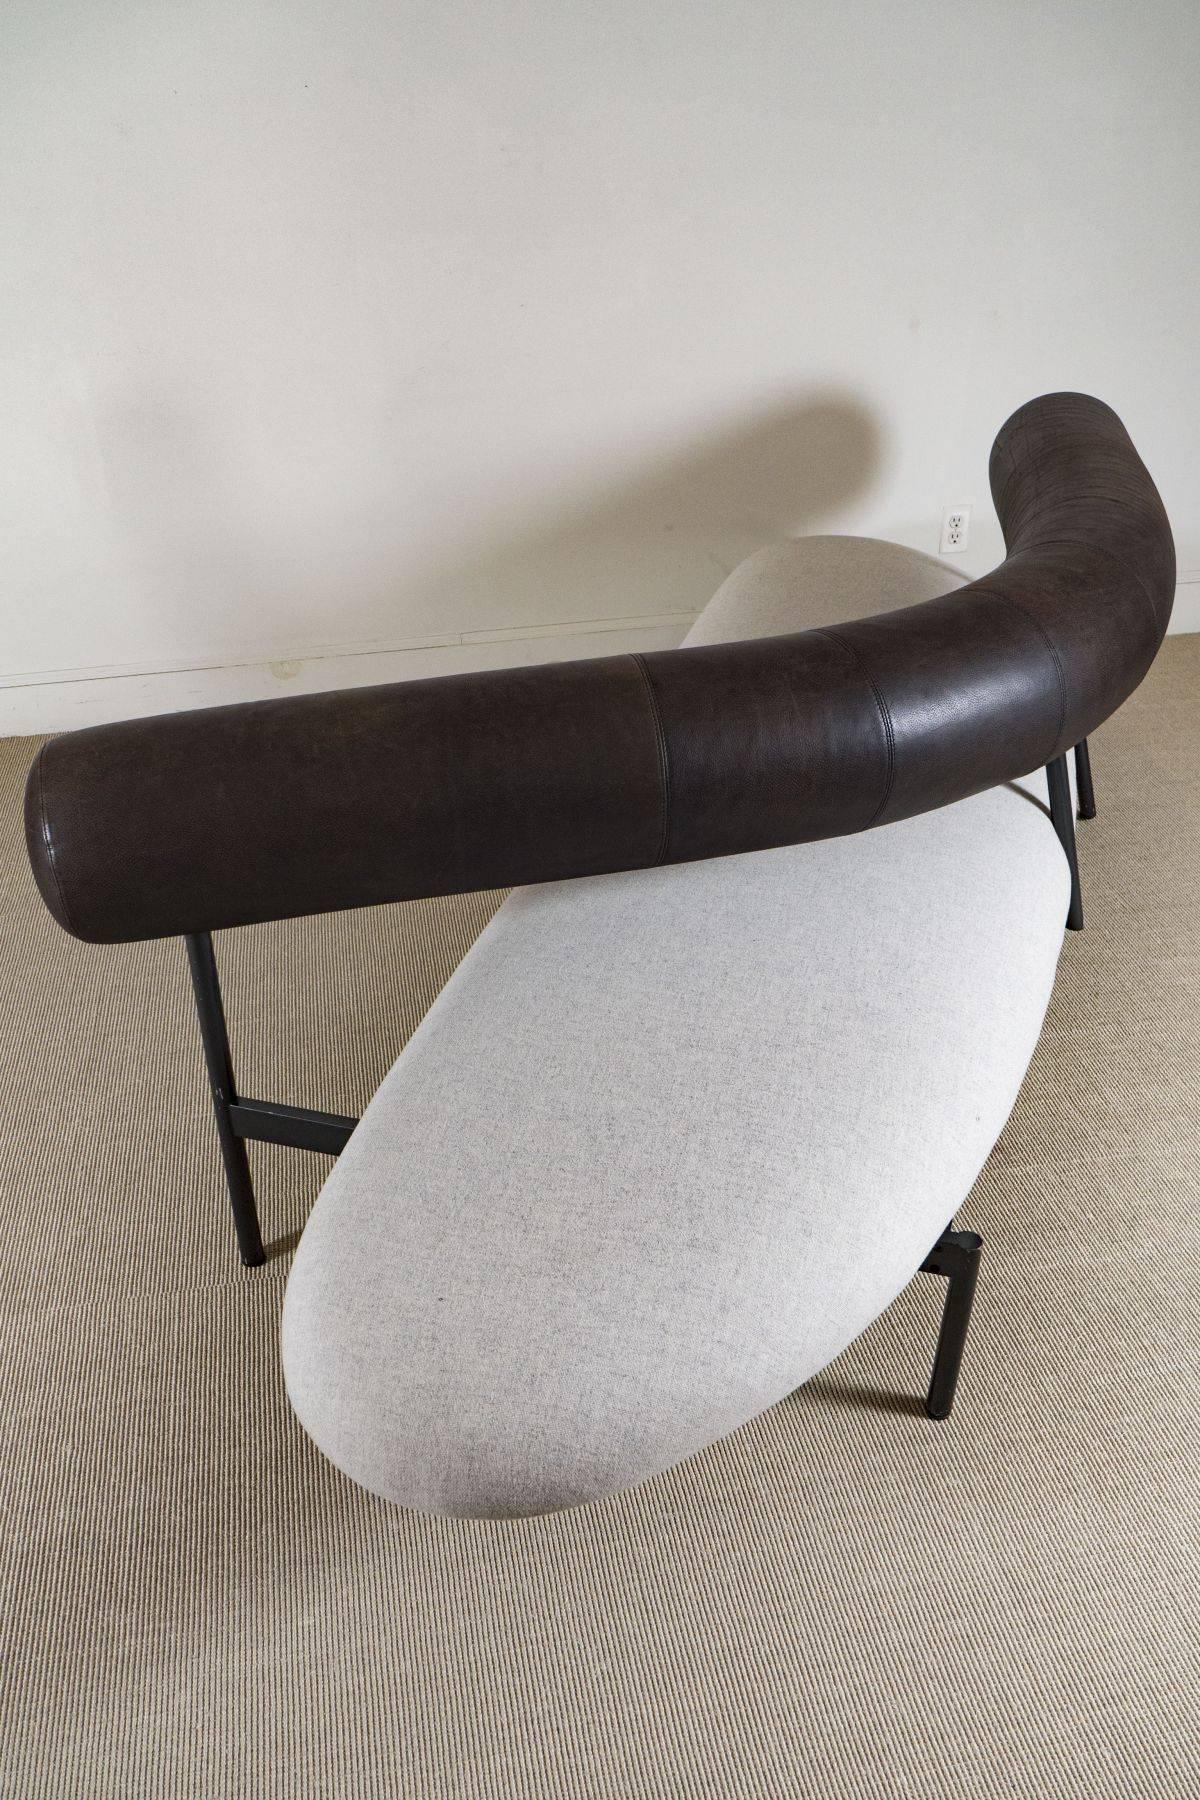 Sculptural Sofa by Xavier Mariscal, Spain, circa 1980 In Good Condition For Sale In New York, NY